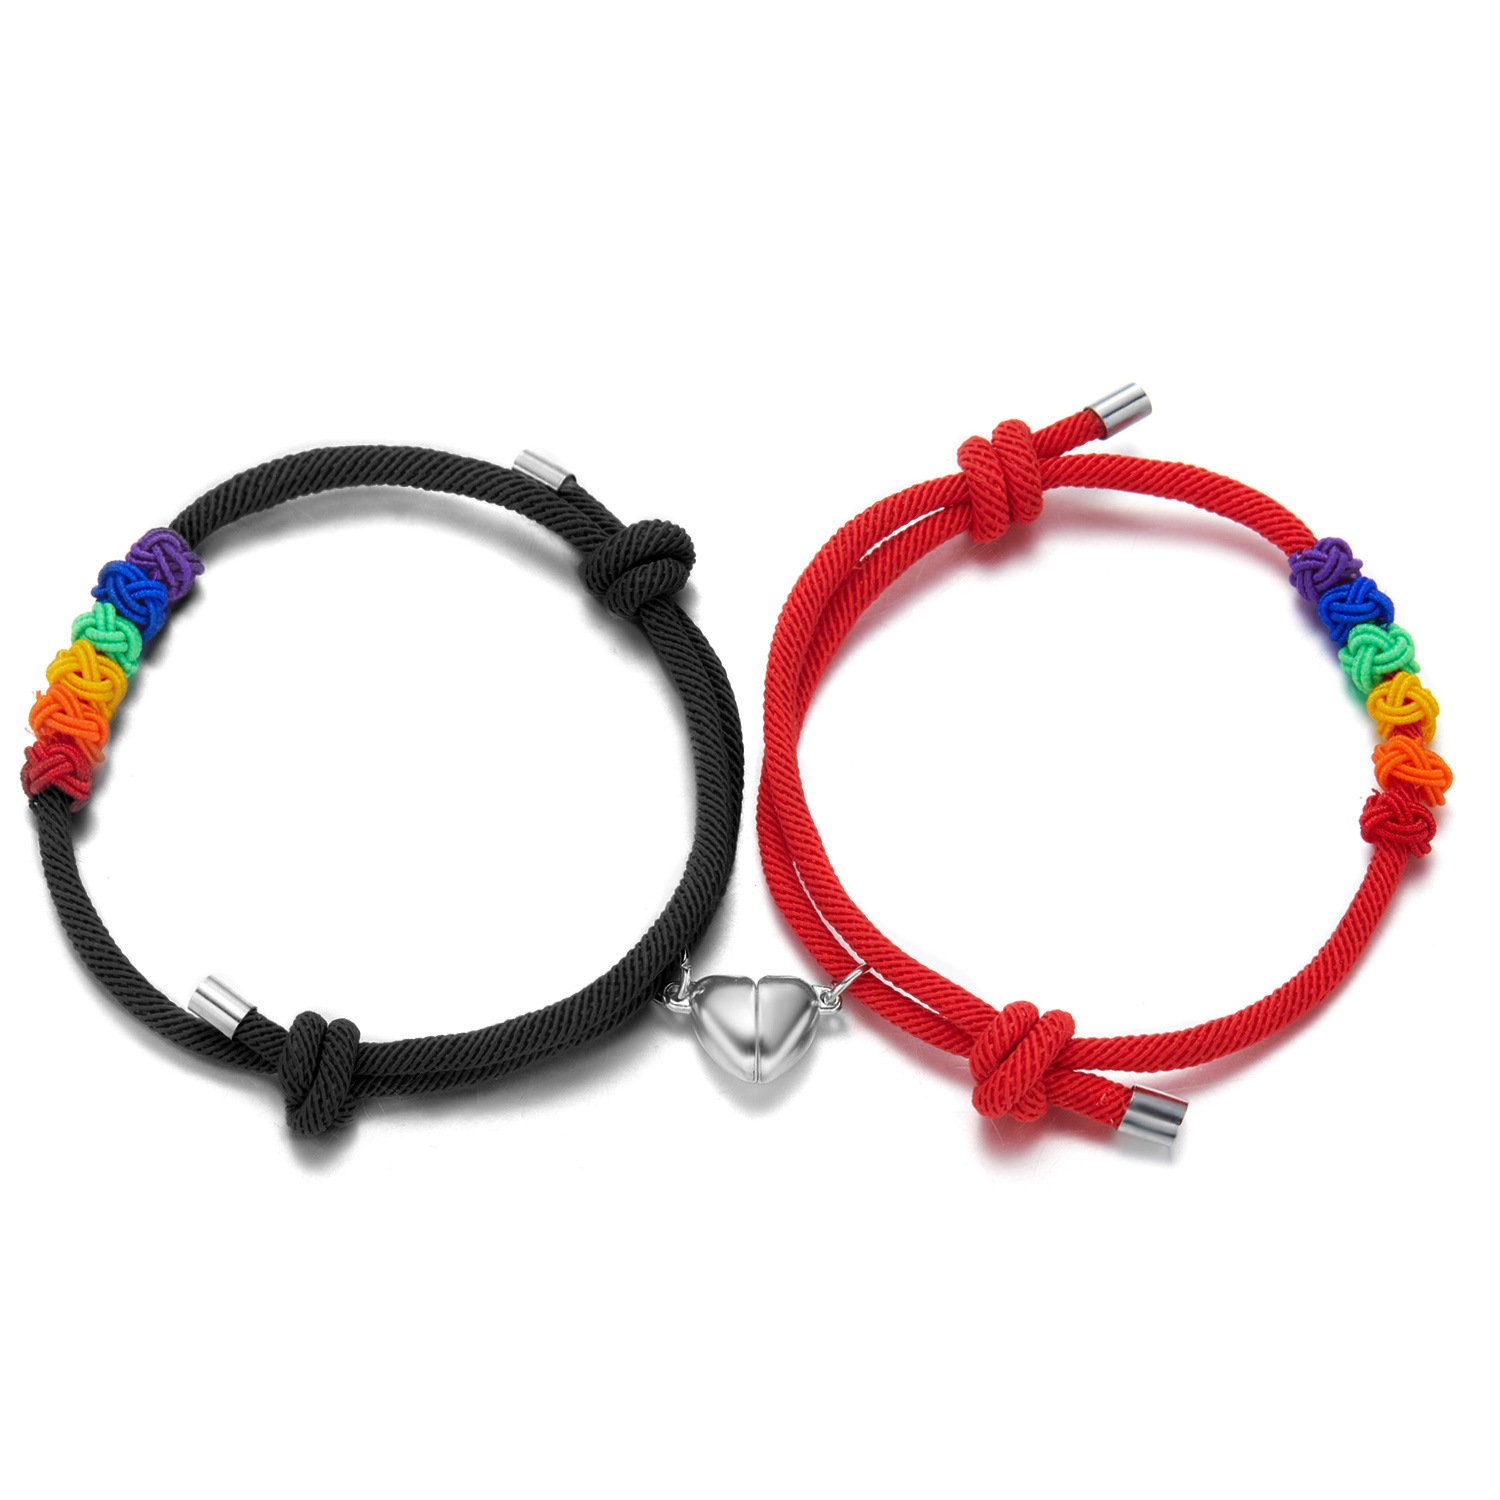 3:Rainbow black and Red